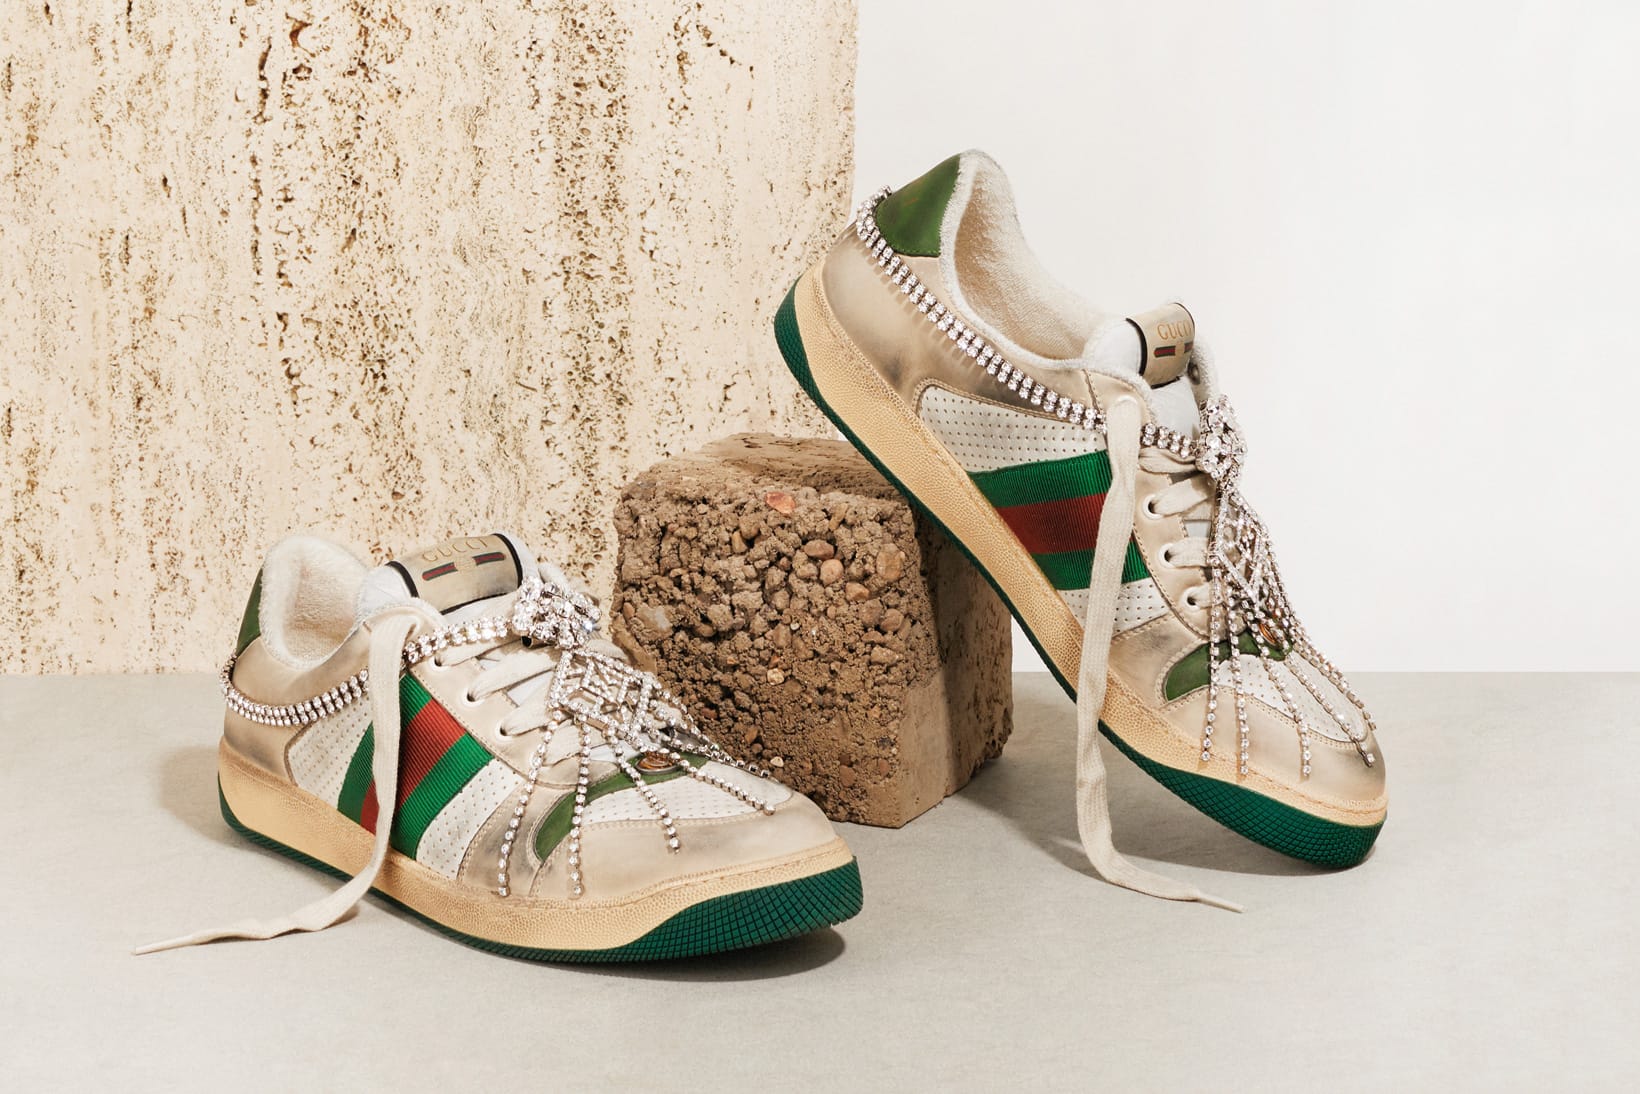 new gucci sneakers 2019